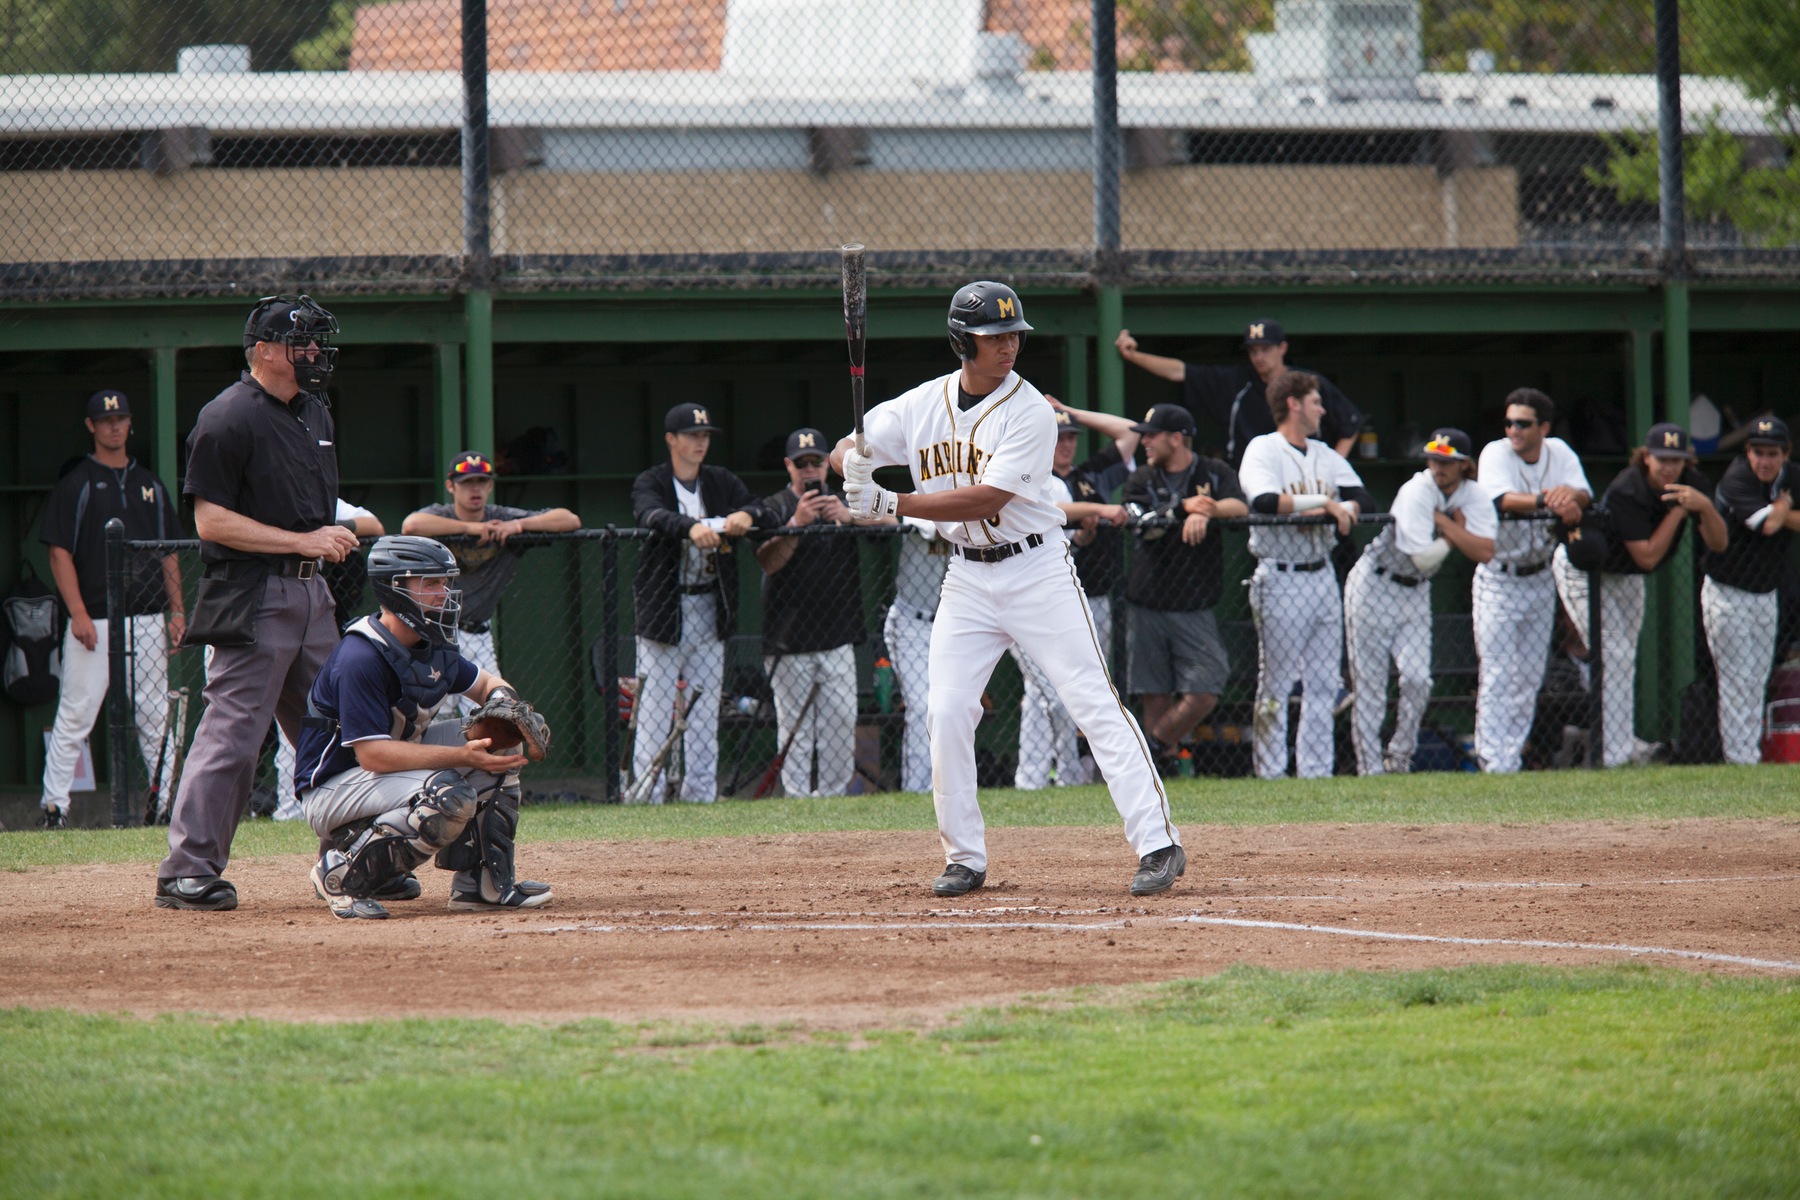 COM’s Garihan Dominates & Bats Explode Against Solano College In 11-1 Victory